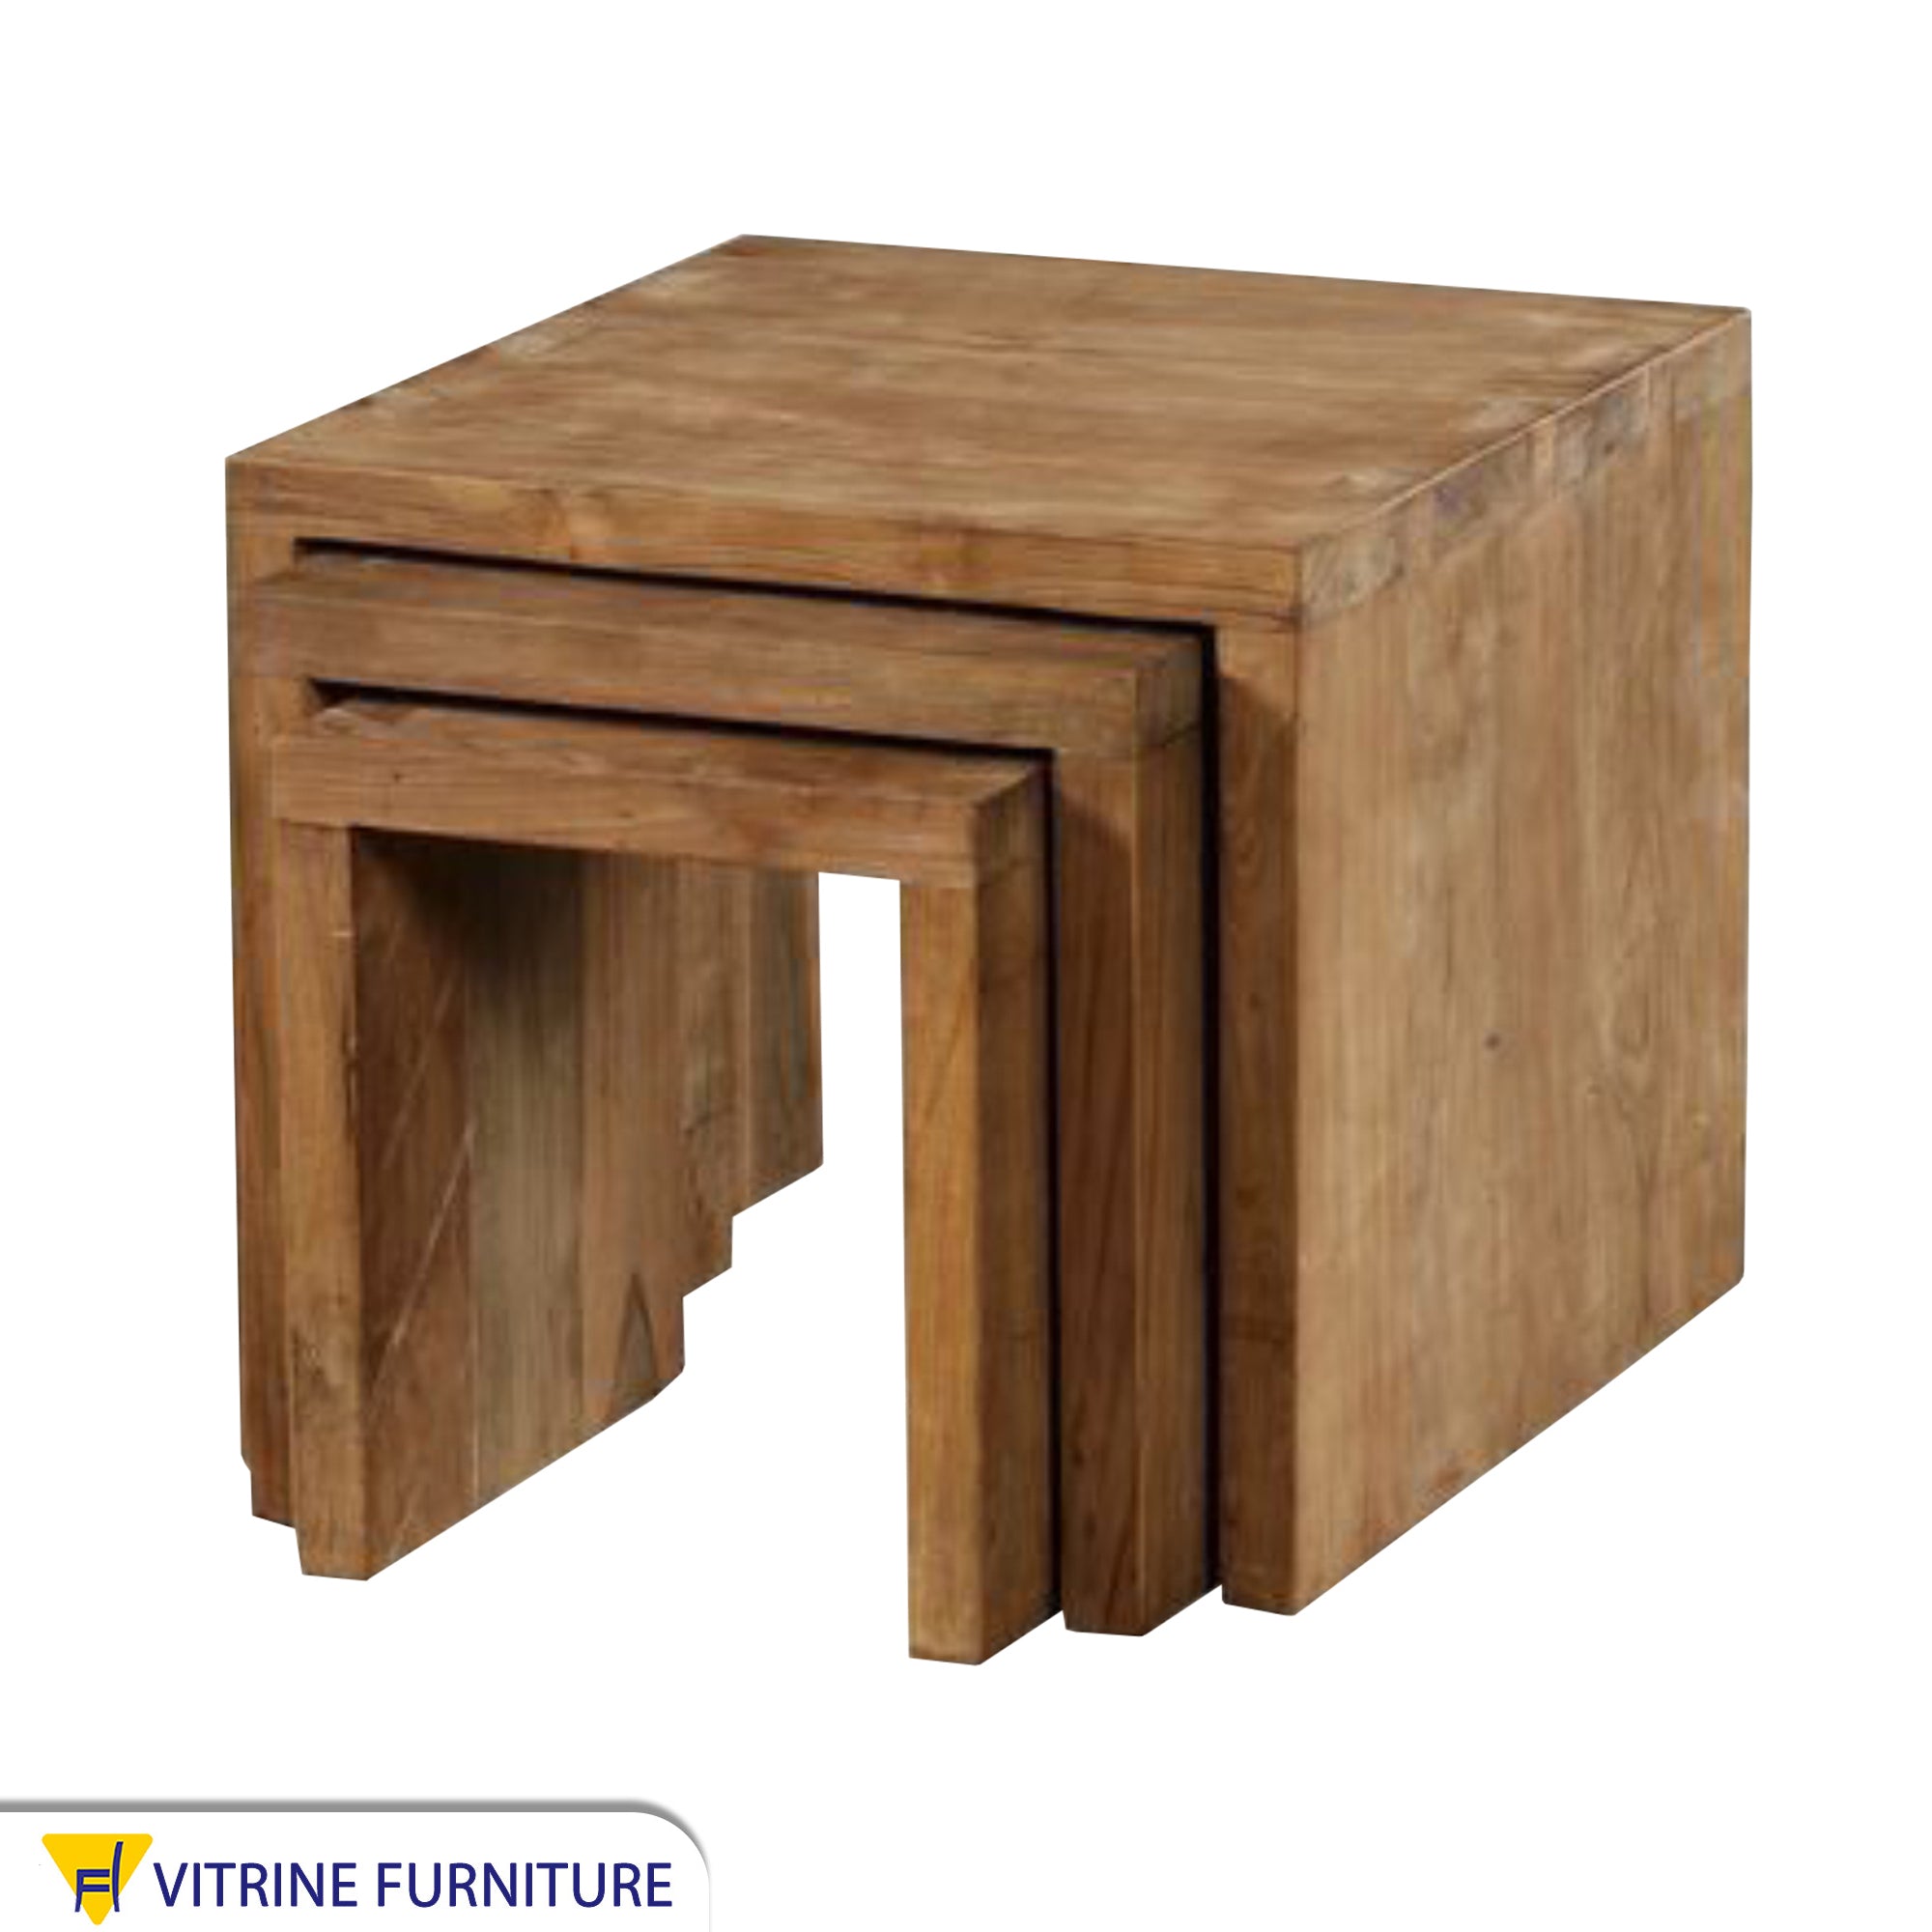 Three nesting tables in wooden brown